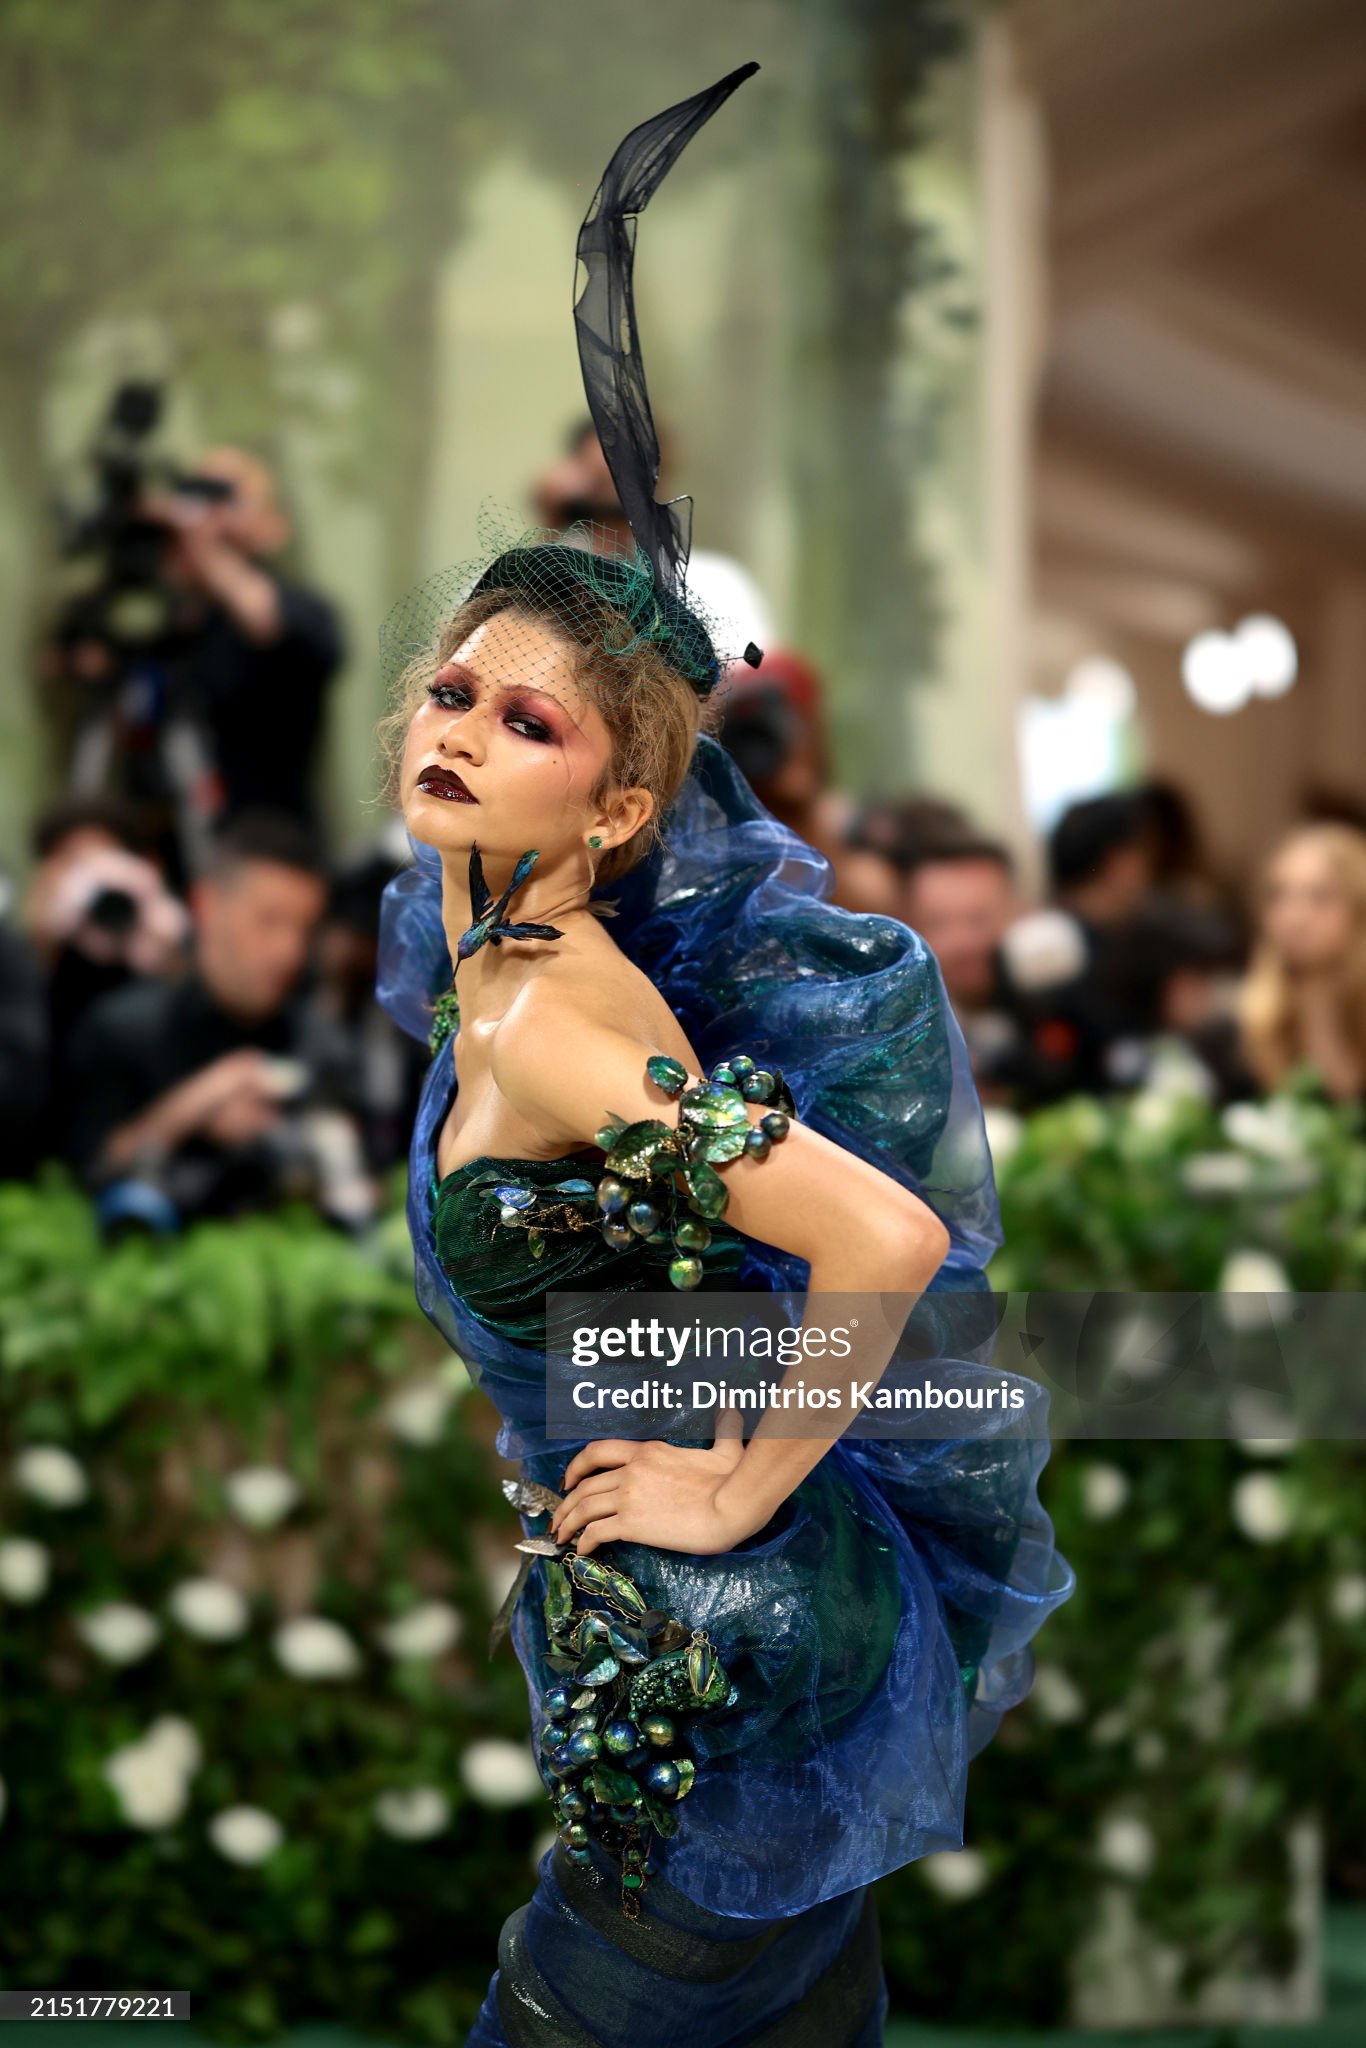 gettyimages-2151779221-2048x2048.jpg